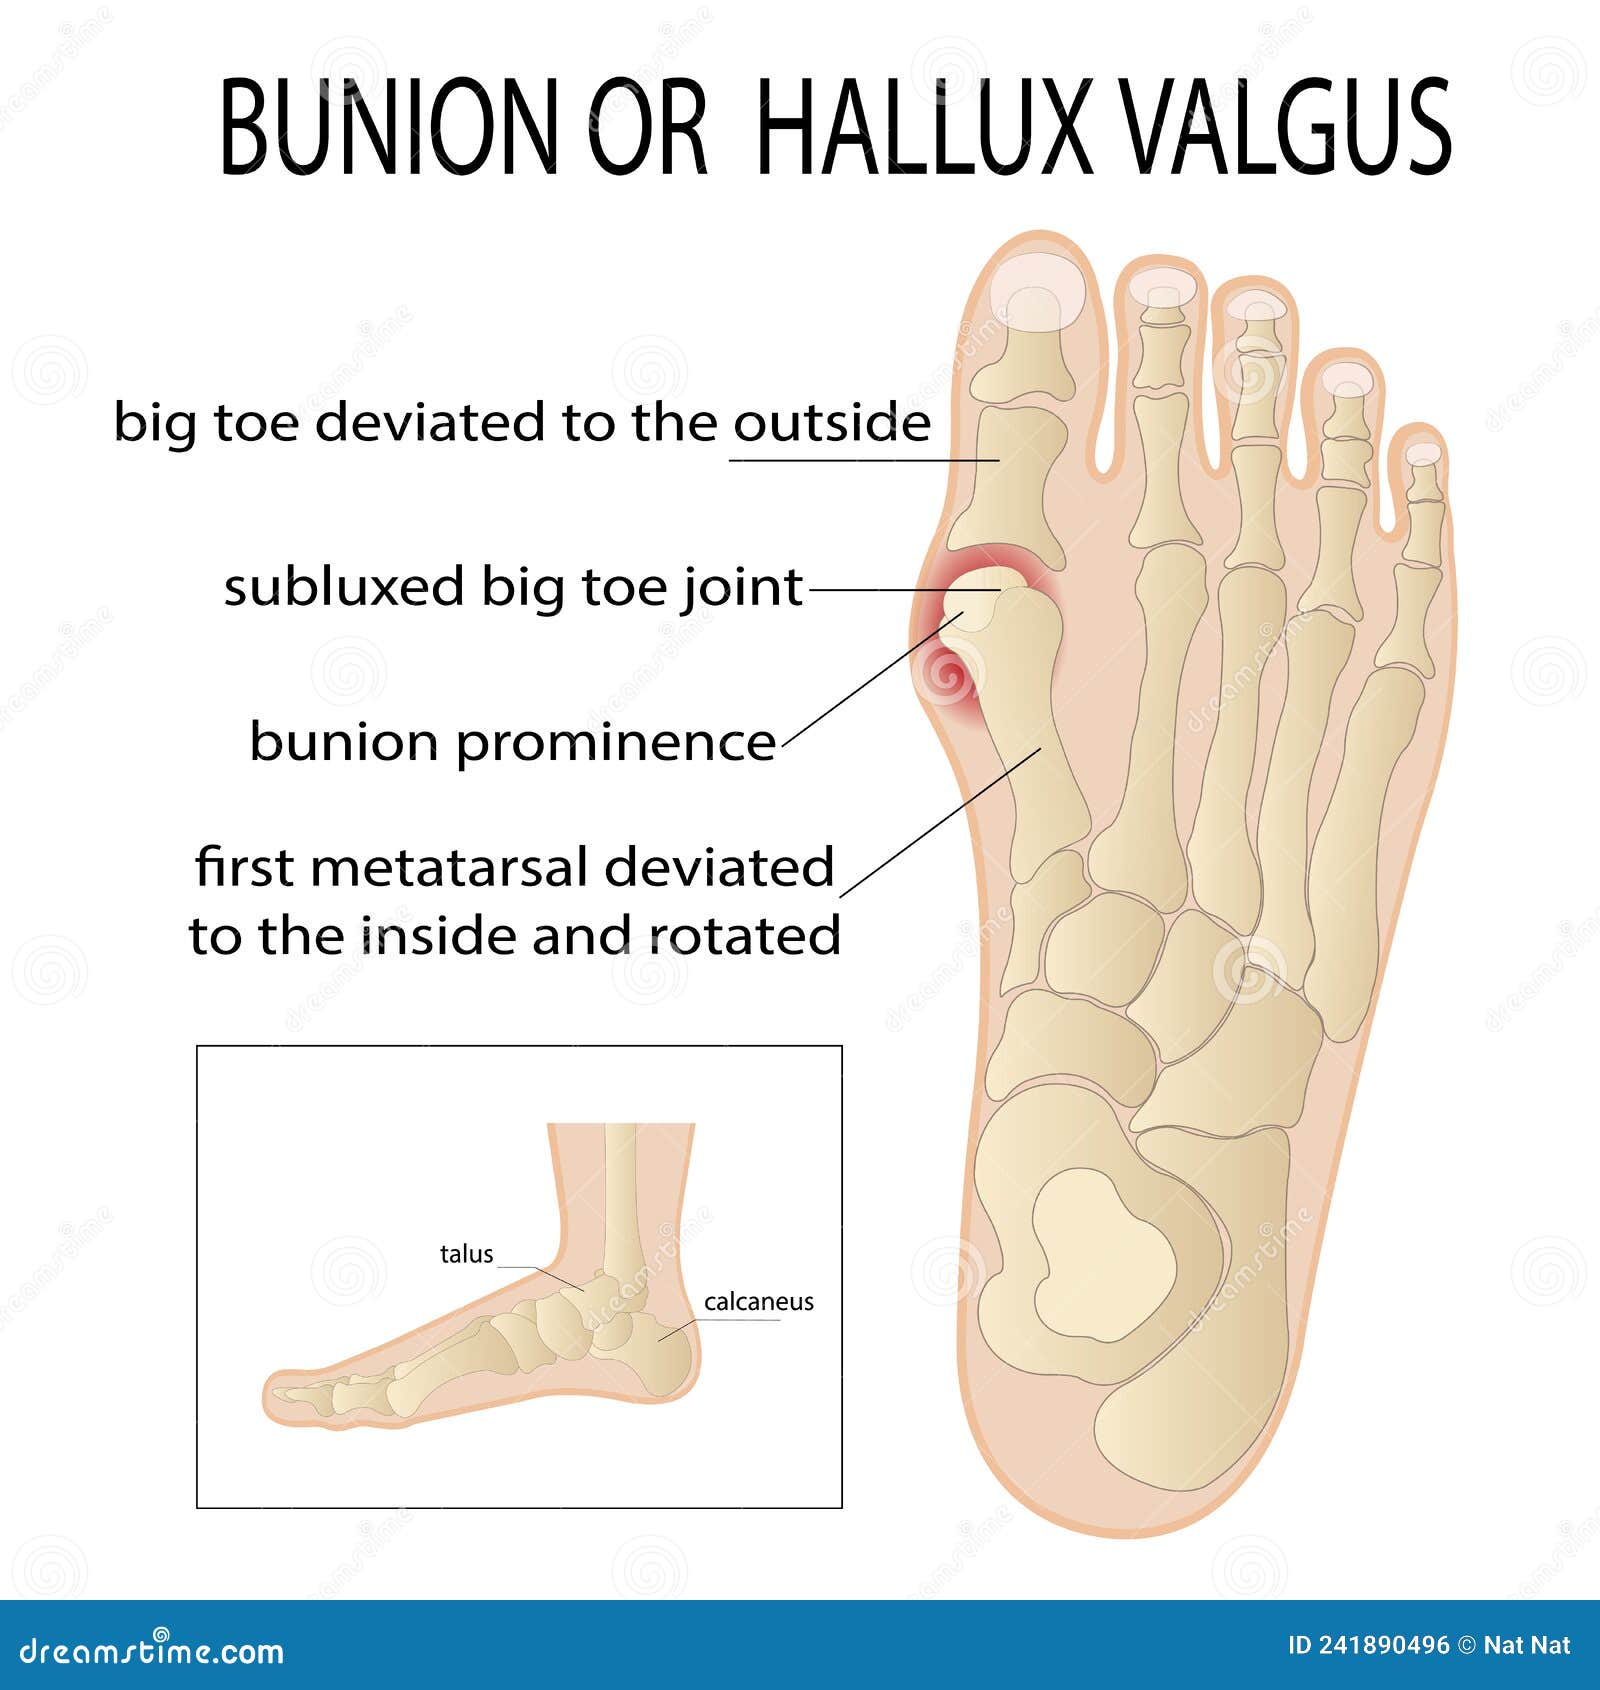 Bursitis on the Sides of the Foot. the Bone and Skin on the Sides of ...